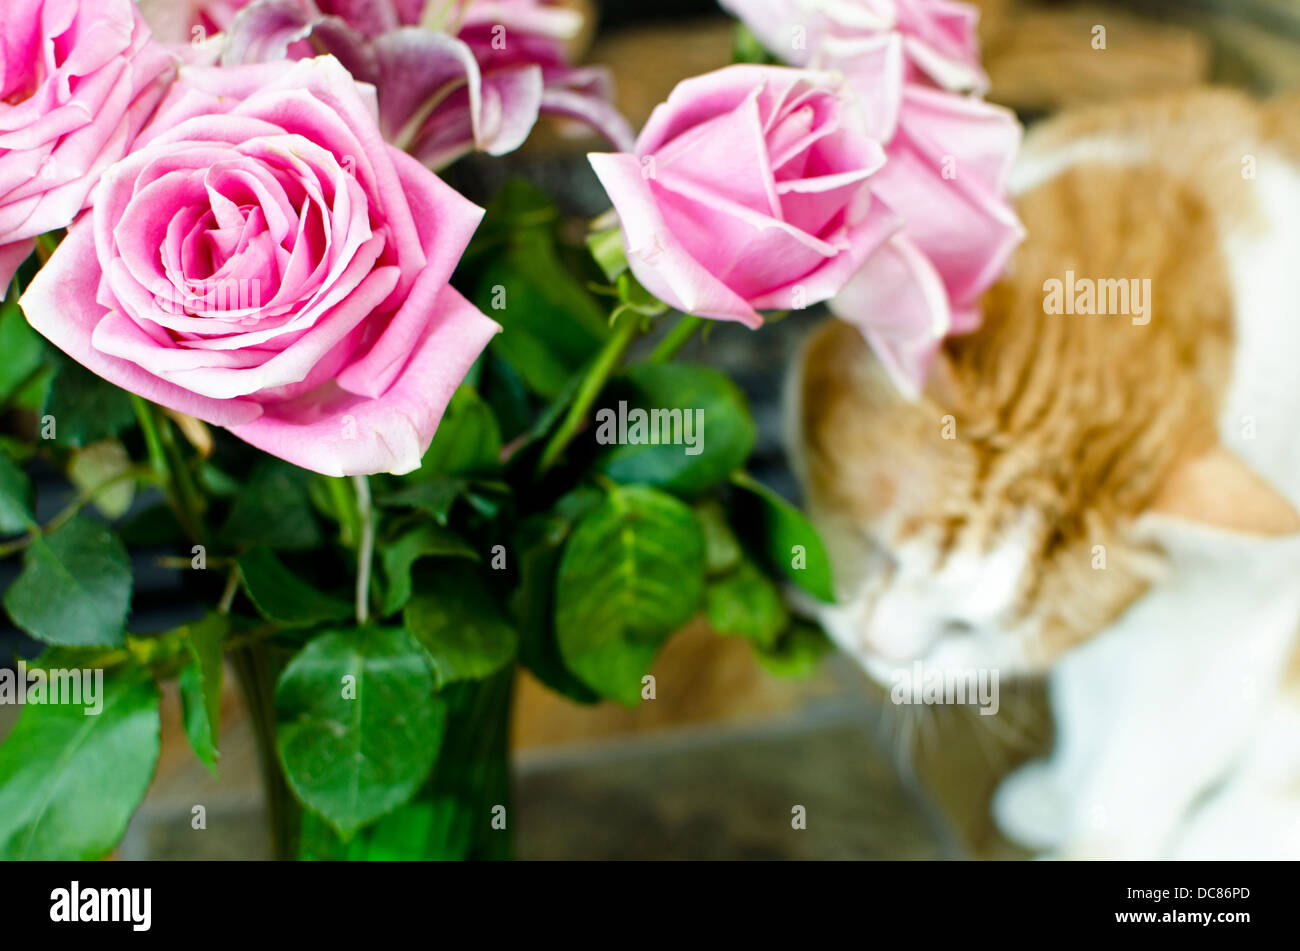 Beautiful pink roses in a vase with a curious cat sniffing them in the background. Misbehaving cat wanting to bite the plants. Stock Photo